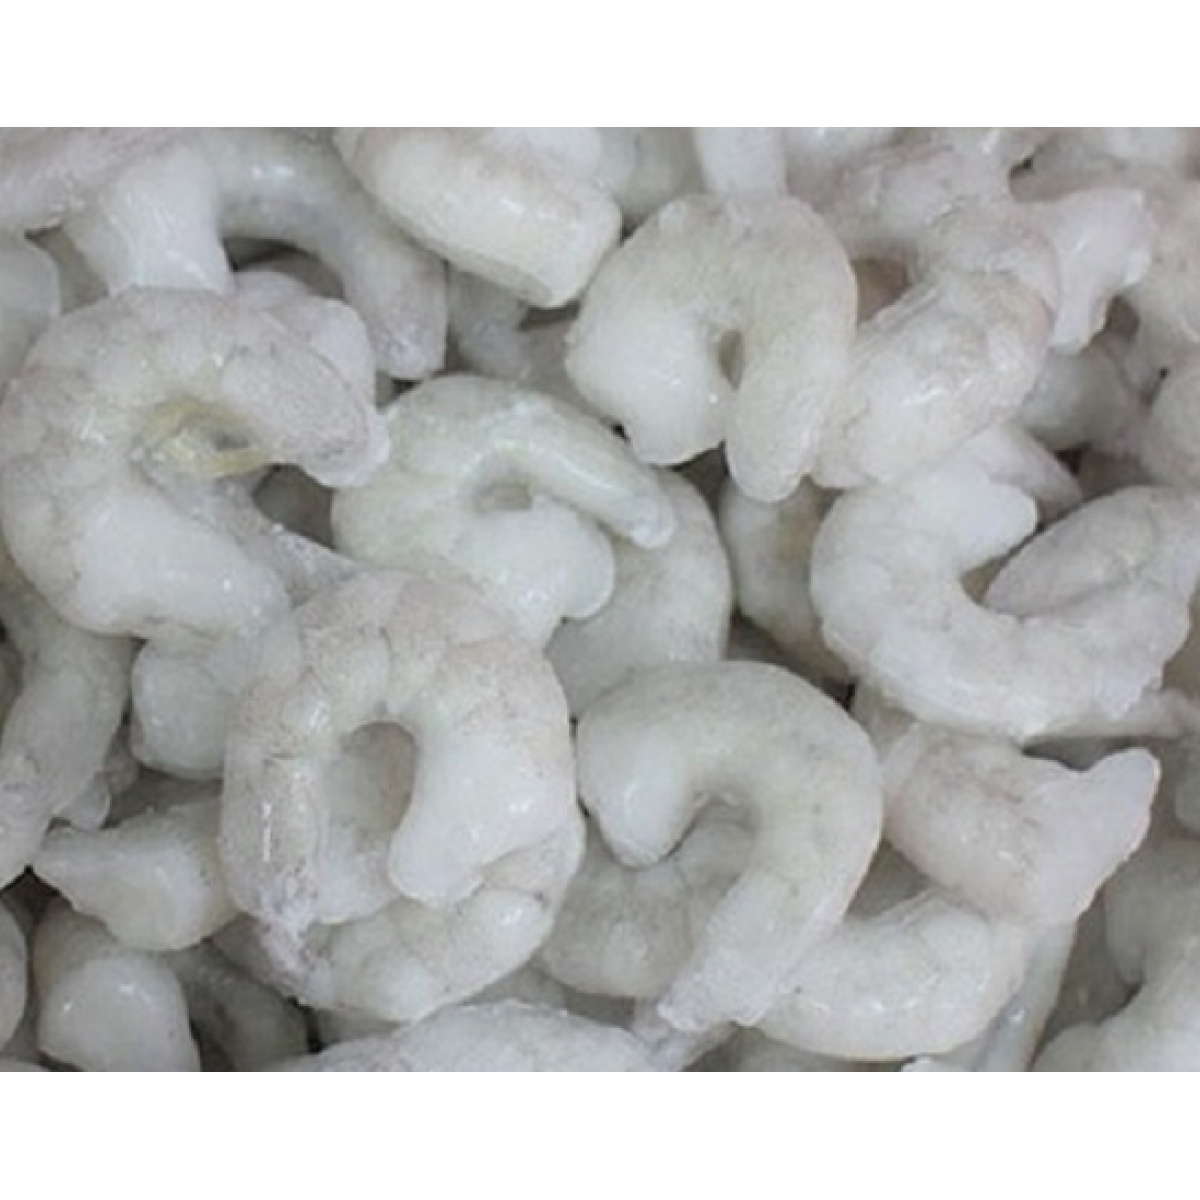 Vannamei Prawn Raw Peeled And Deveined Back Cut Size 41 50